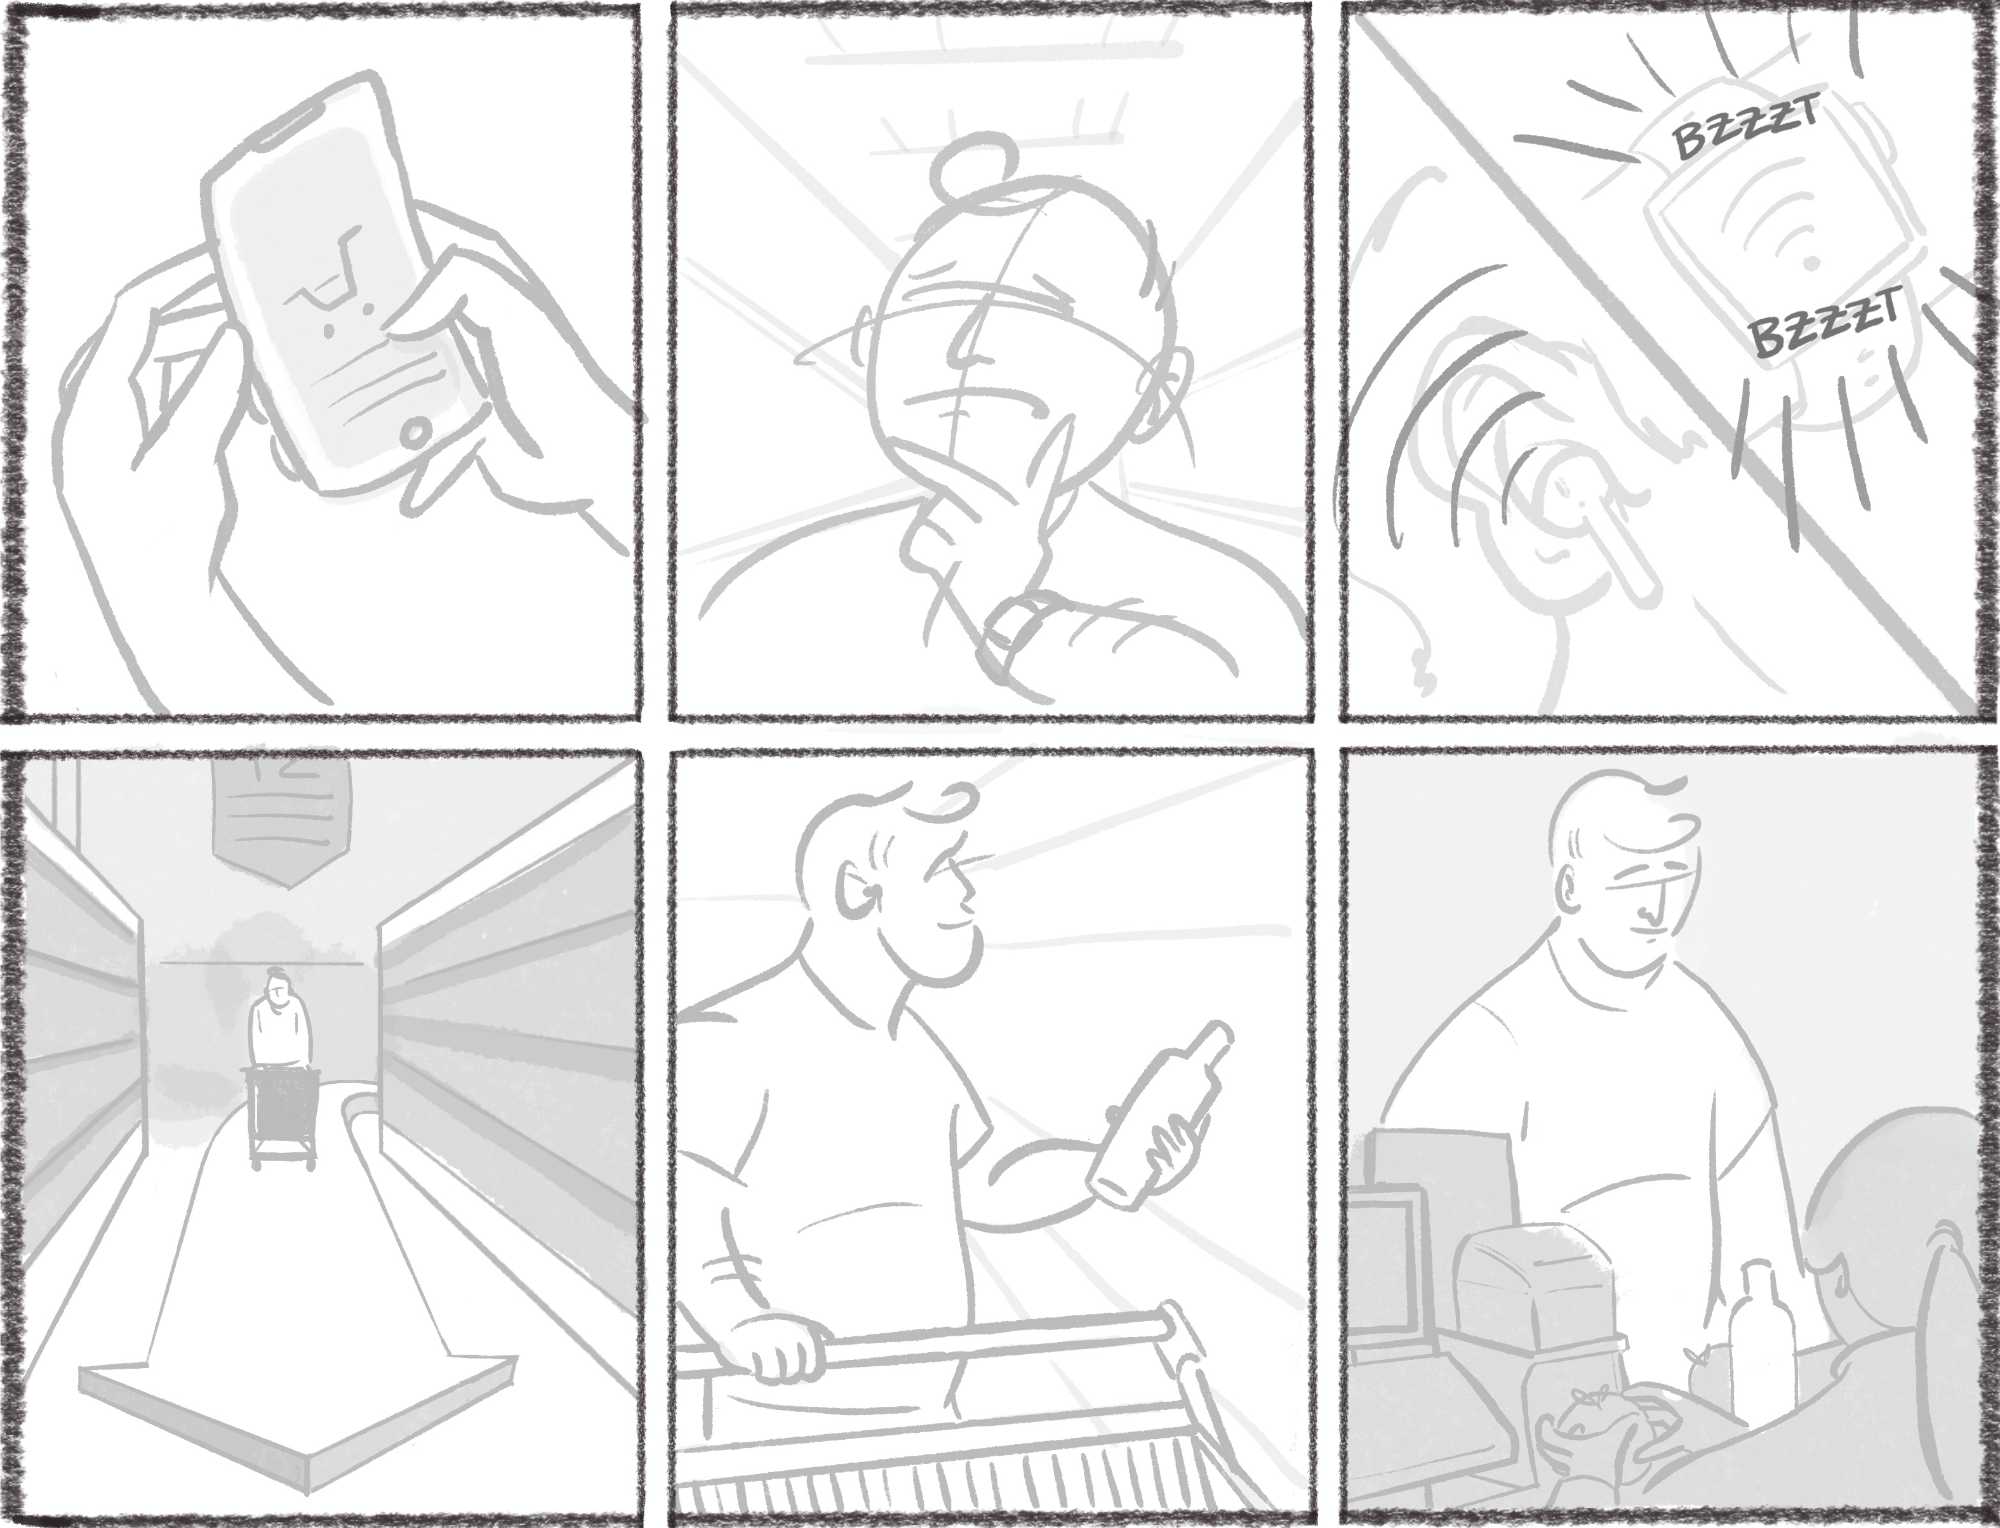 comic panels showing a user checking his shopping list and using his AirPods and Apple Watch to find where something is in a supermarket